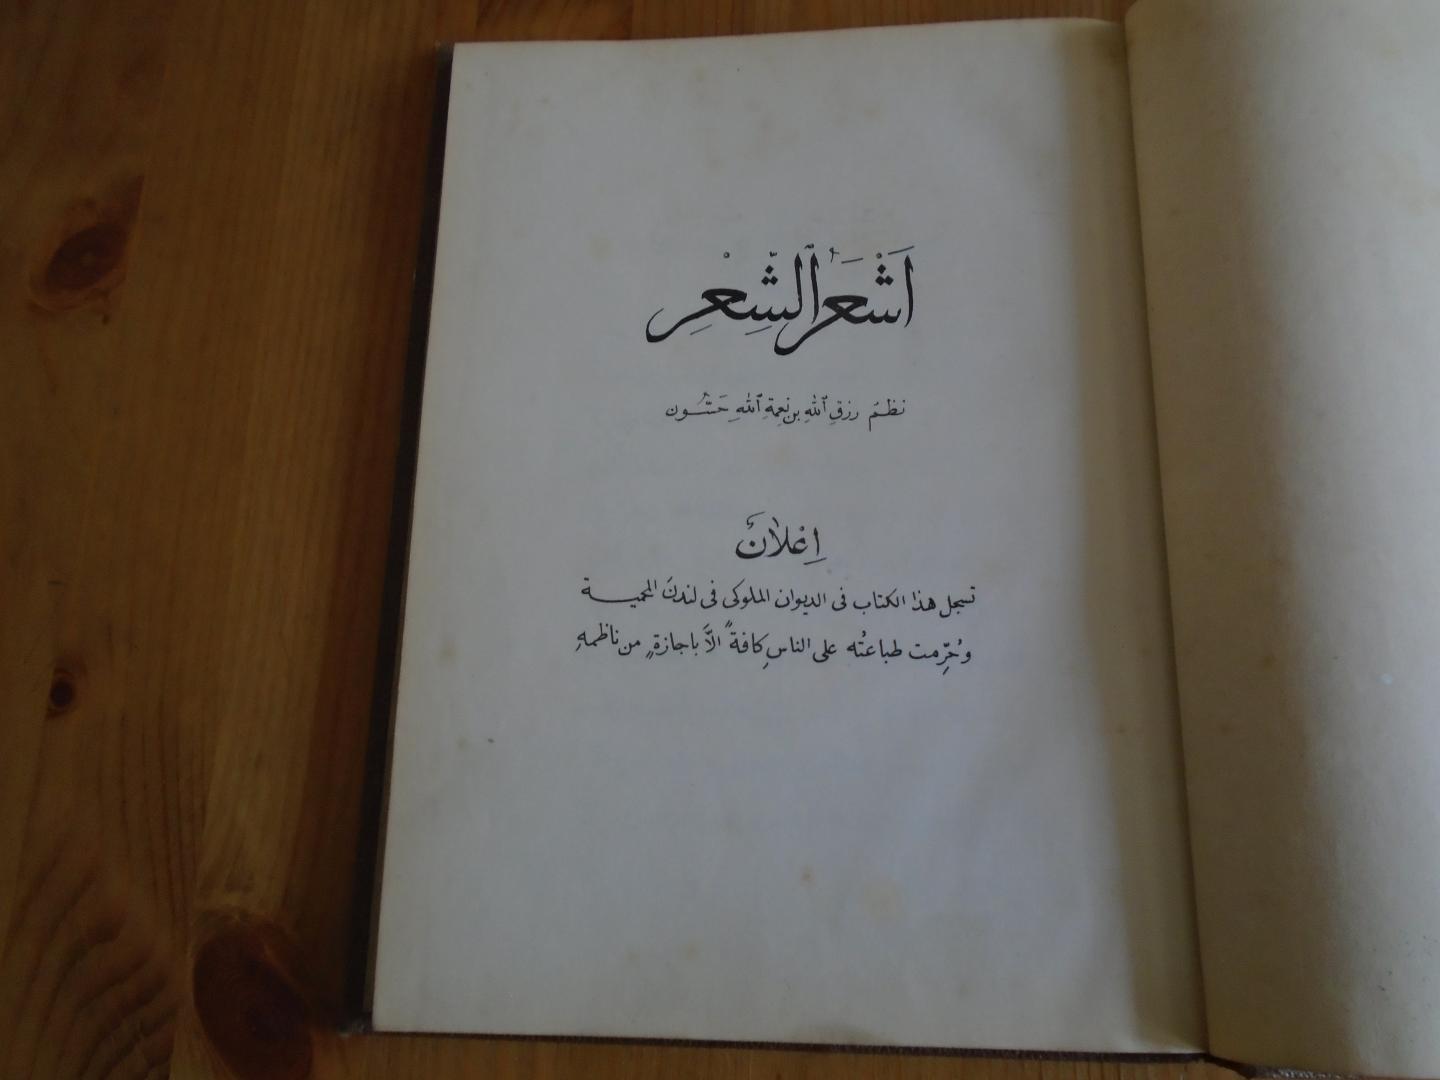 Hassoun, R. - Ashar es shir. The Poem of Poems; a Metrical Arabic Version of the Book of Job, etc.